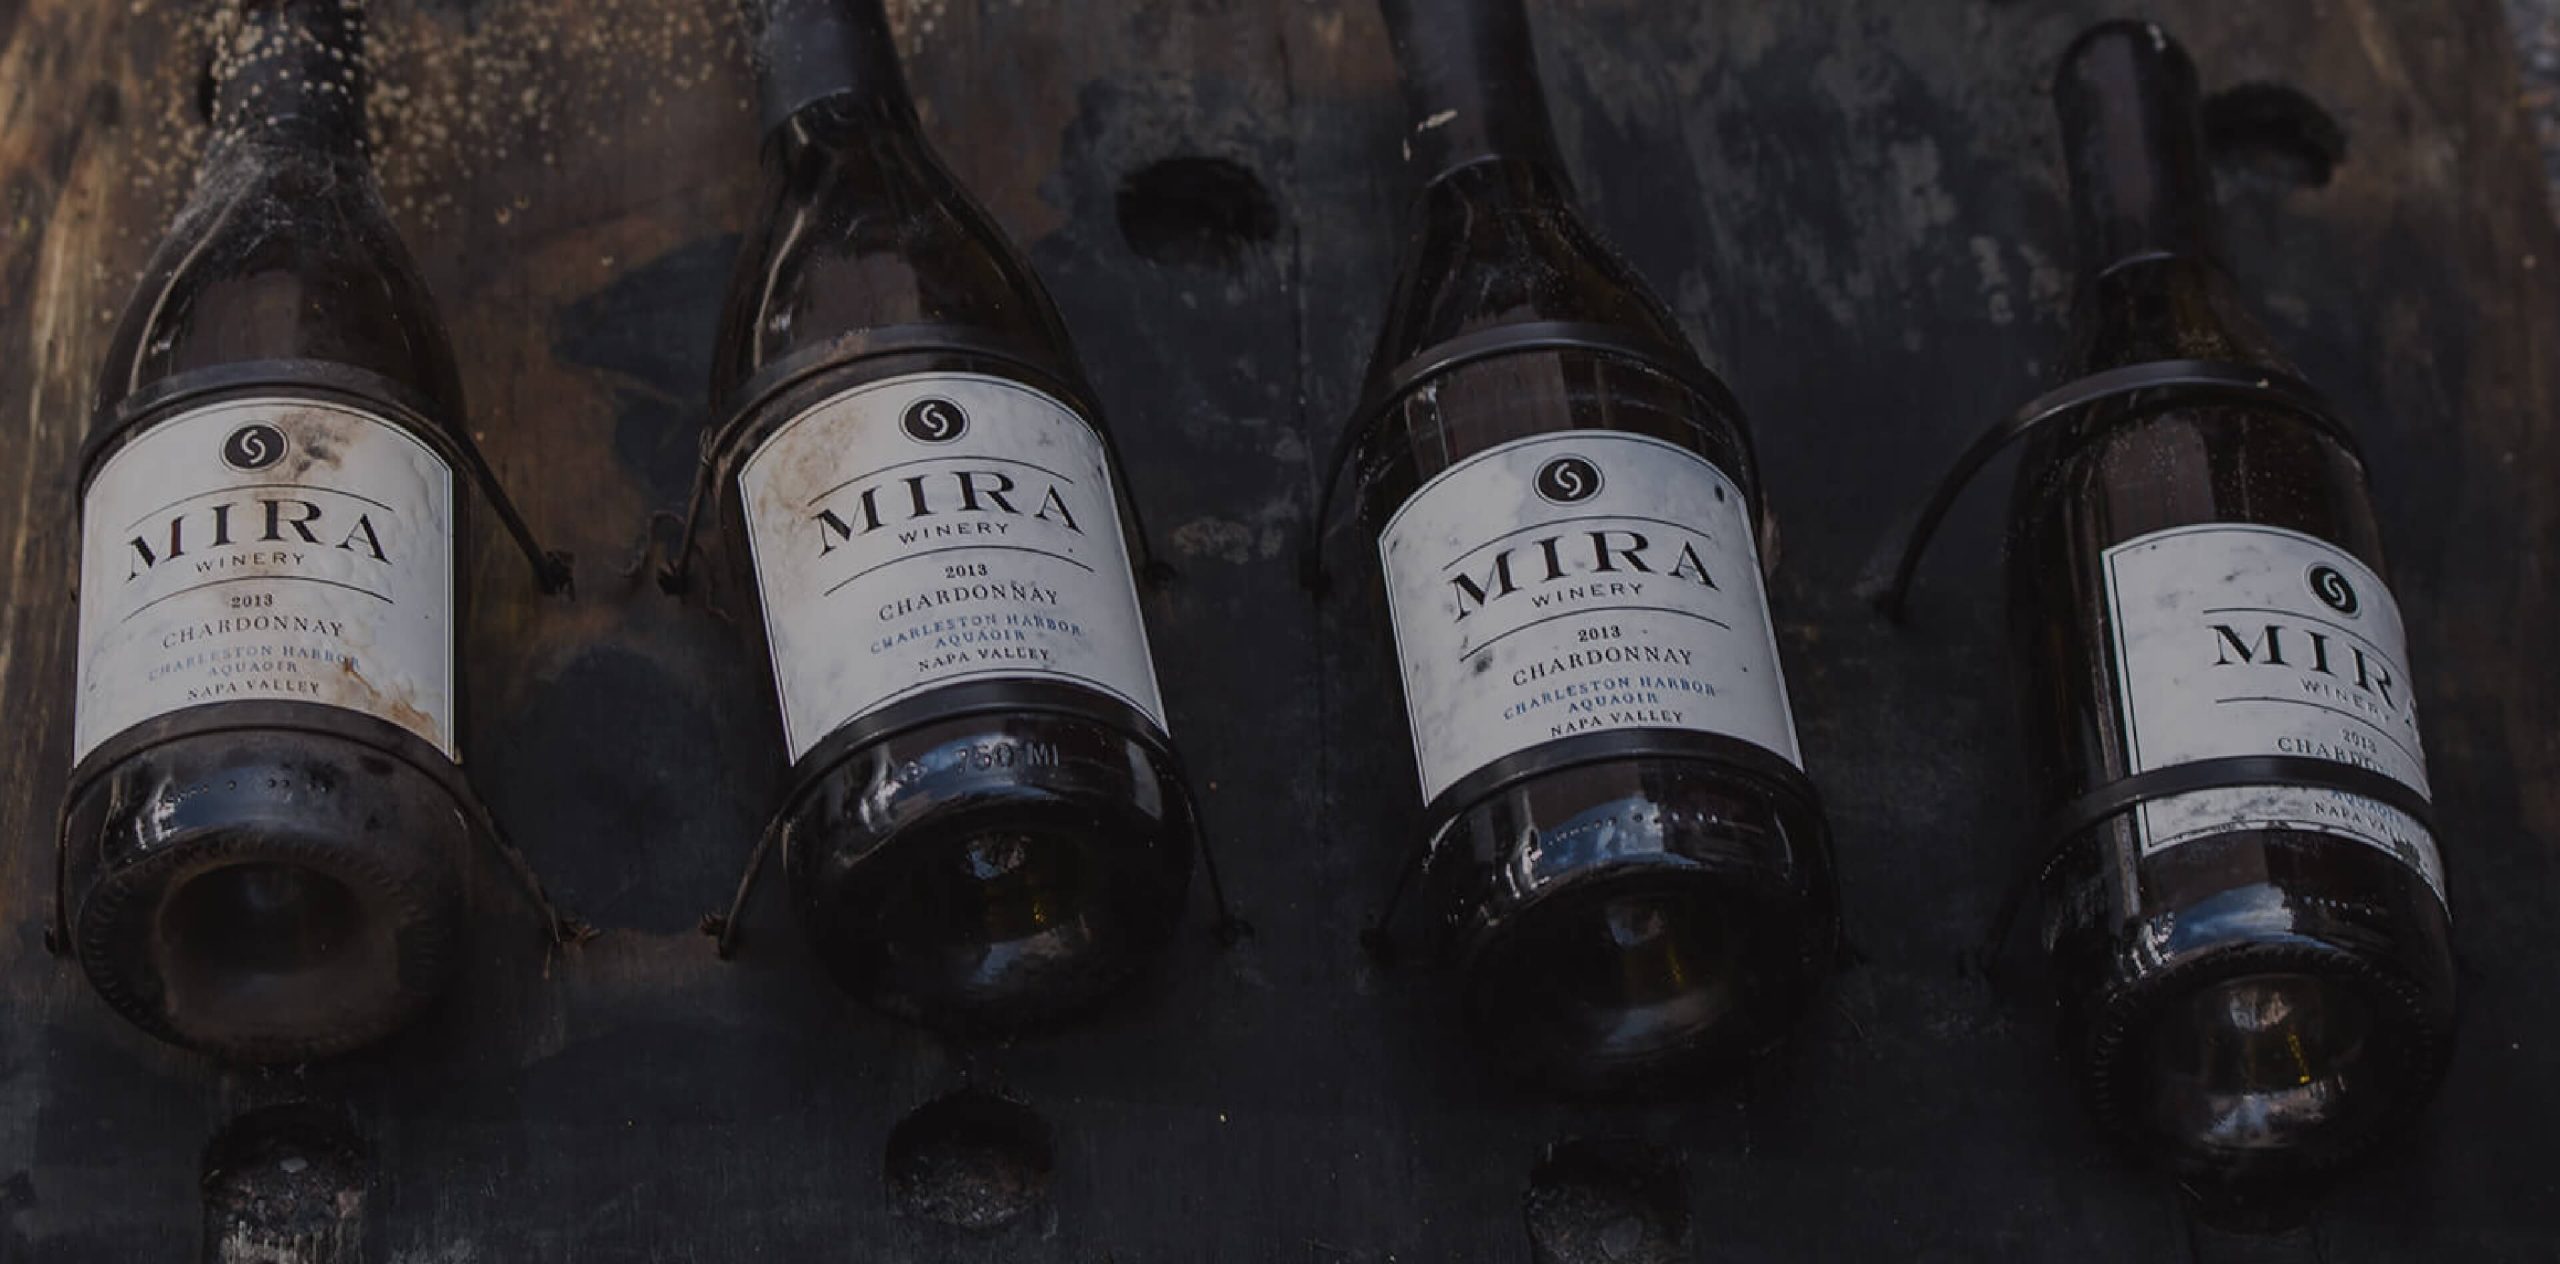 Bottles from Mira Winery